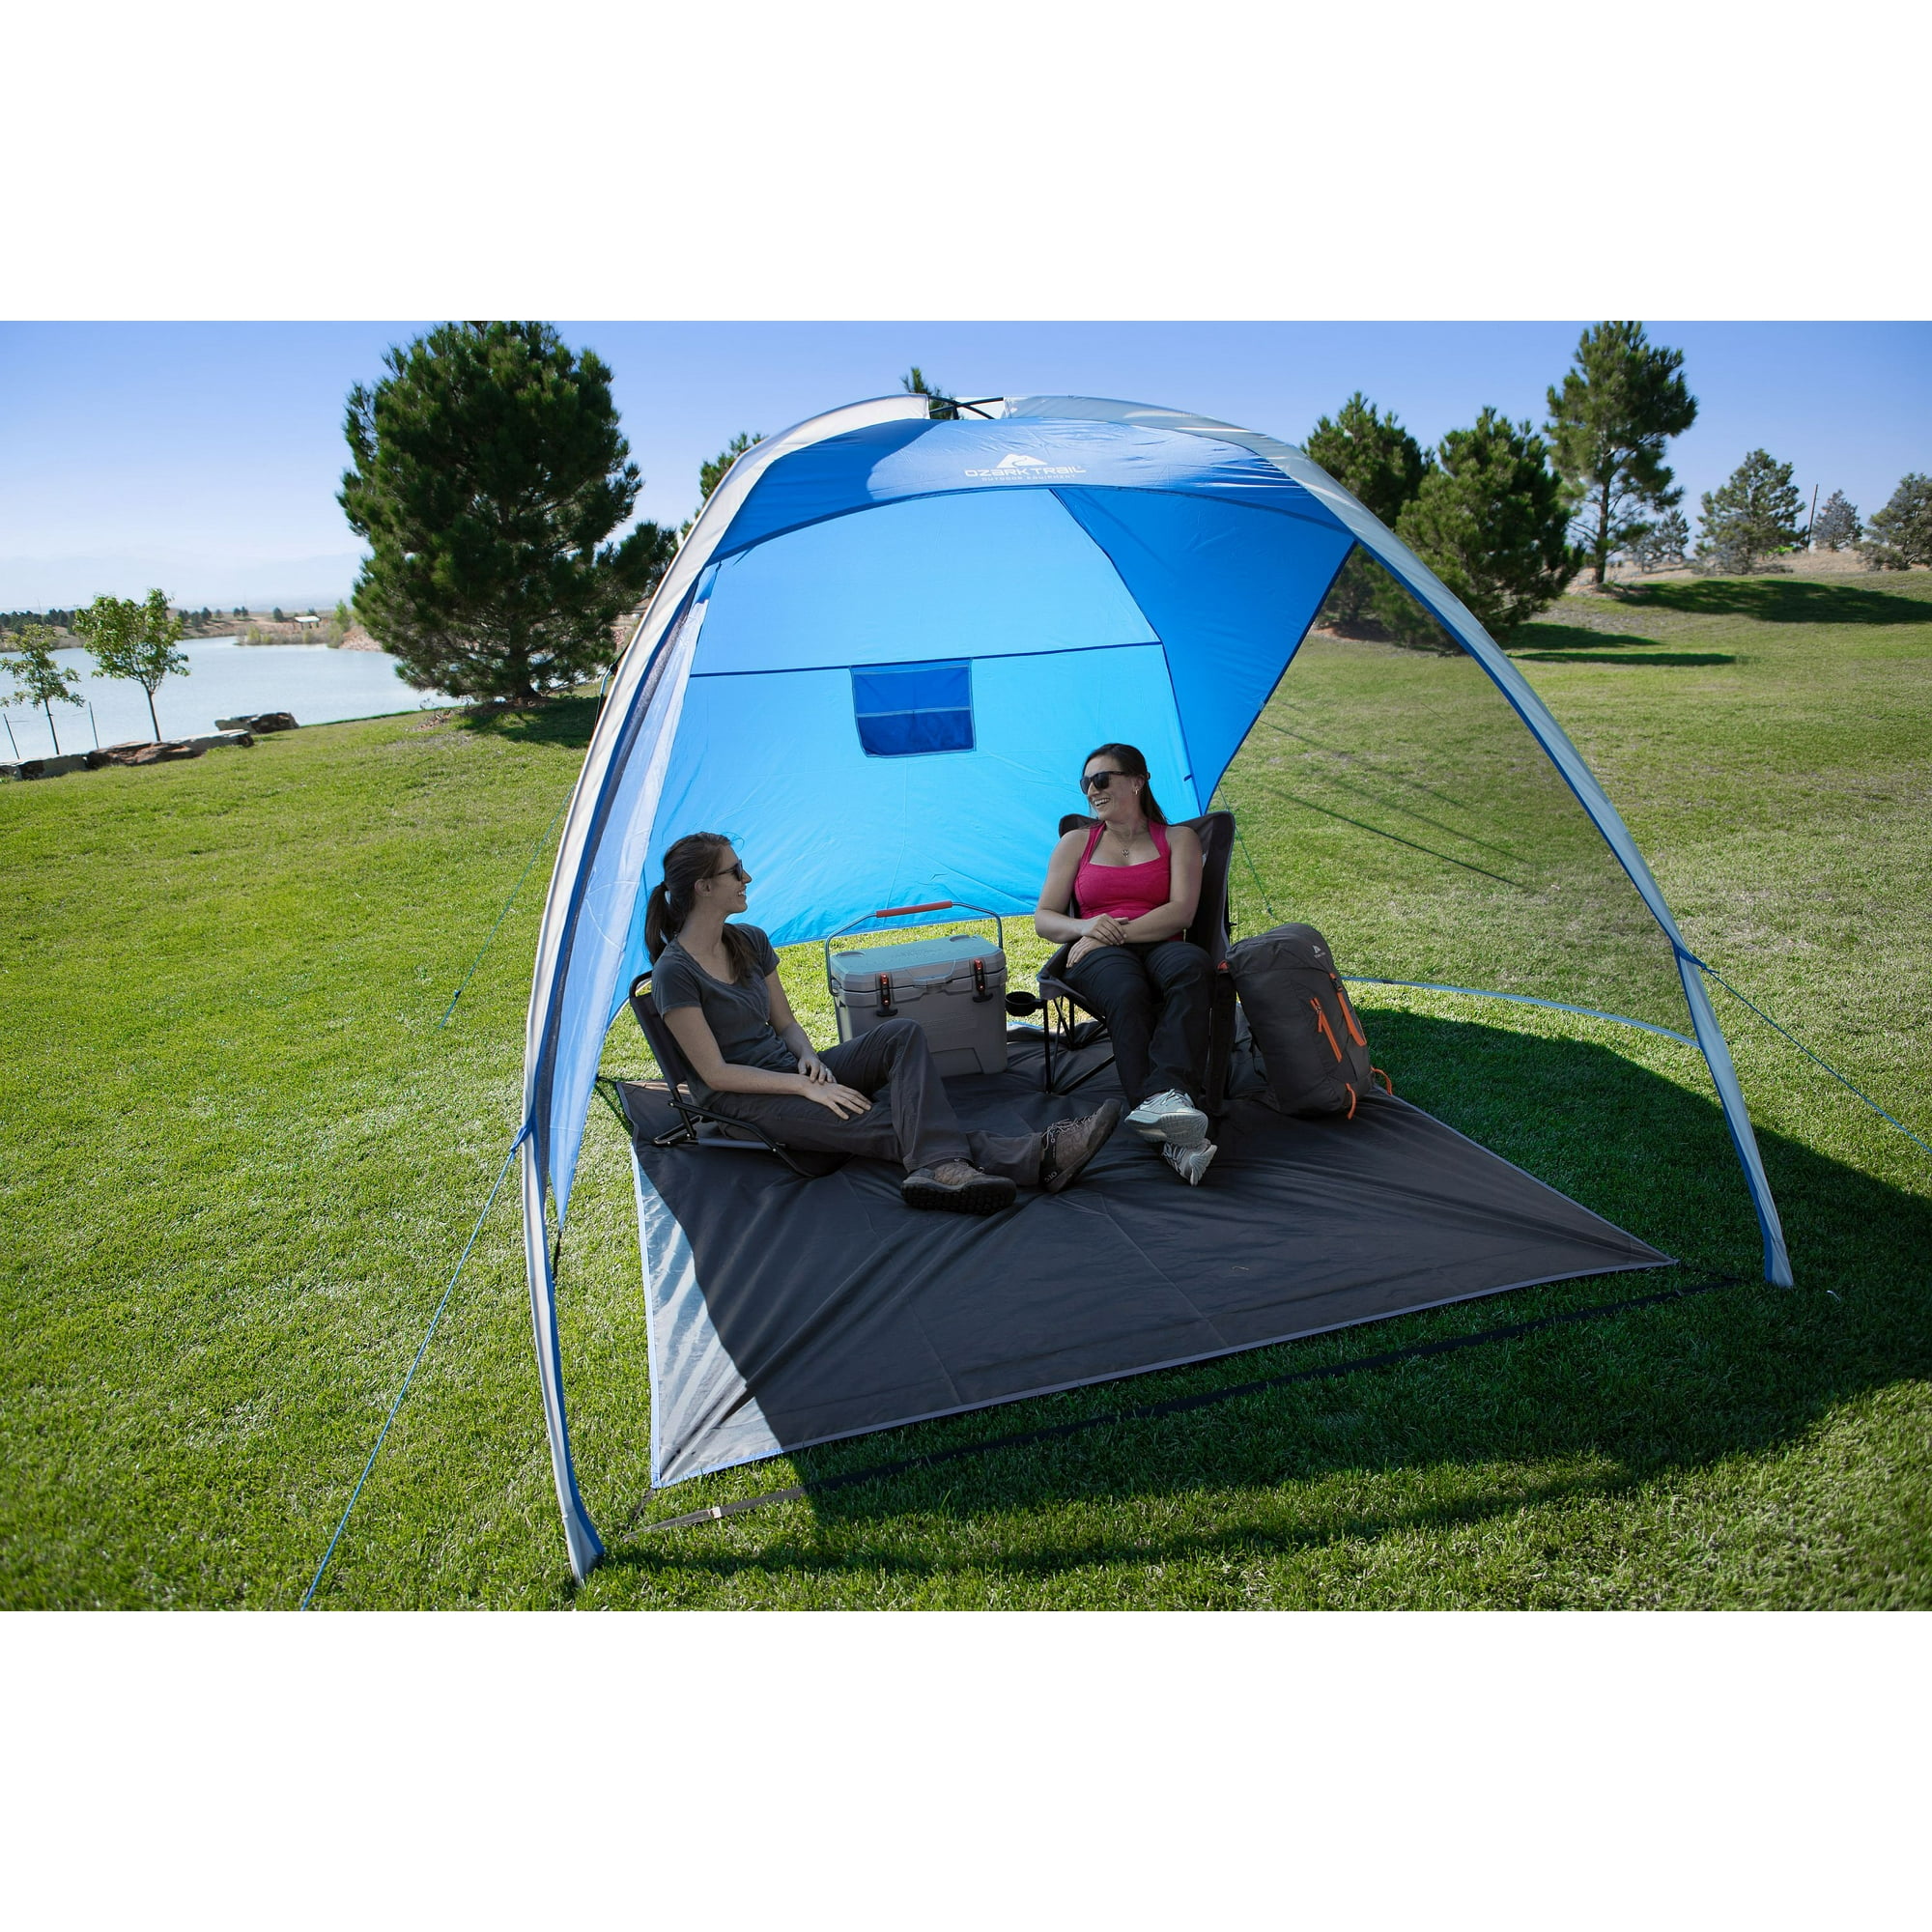 Ozark Trail Sand Island 7.5&rsquo; x 7.5&rsquo; Sunshade Beach Tent, with UV Protection and Hidden Pocket